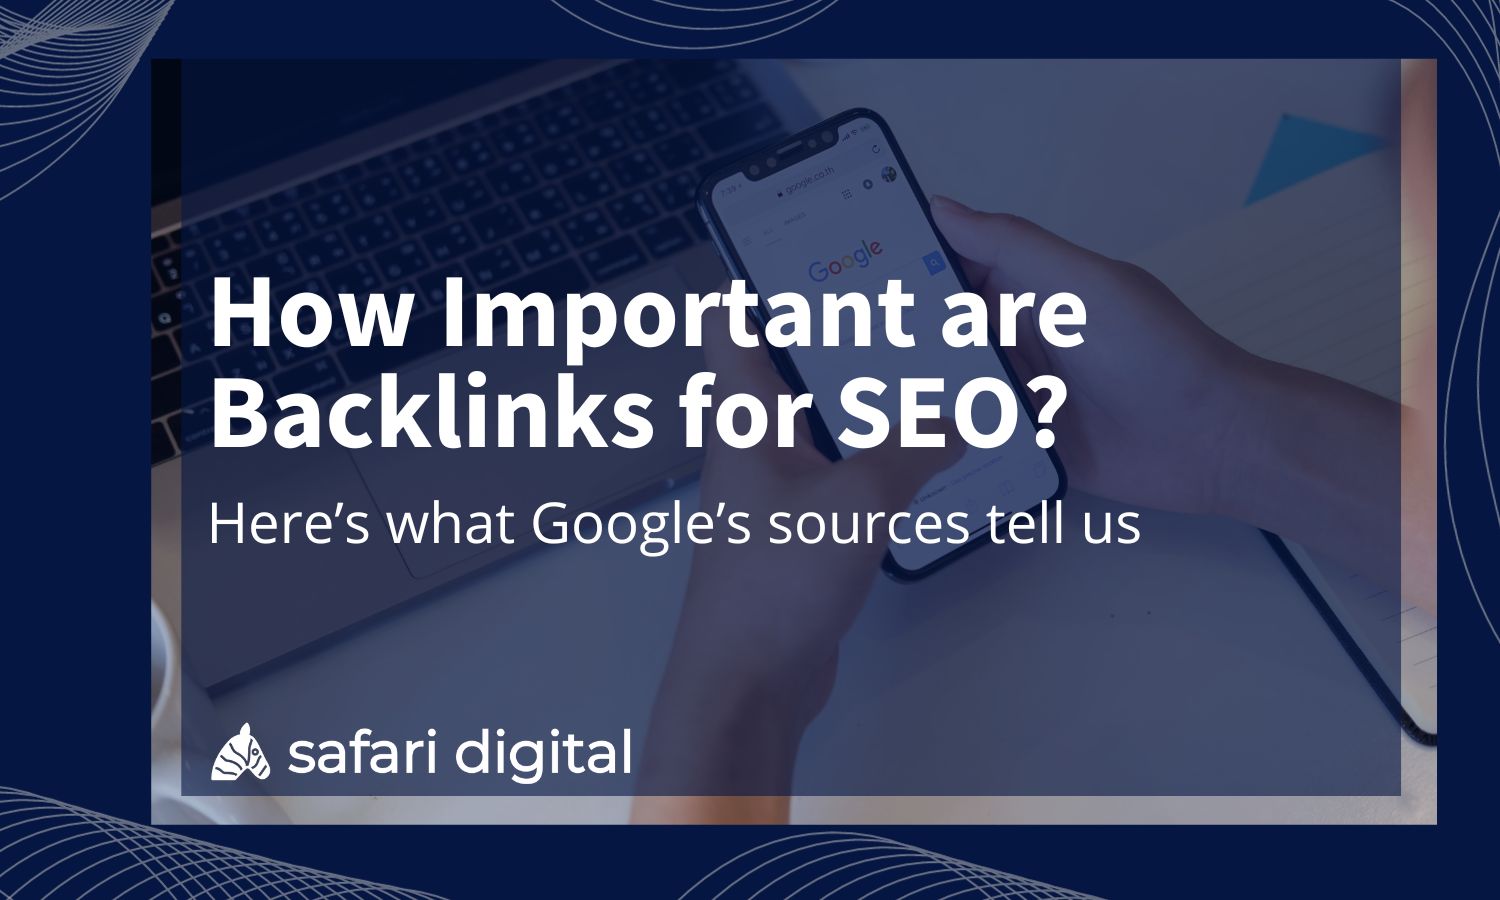 How Important are Backlinks for SEO?